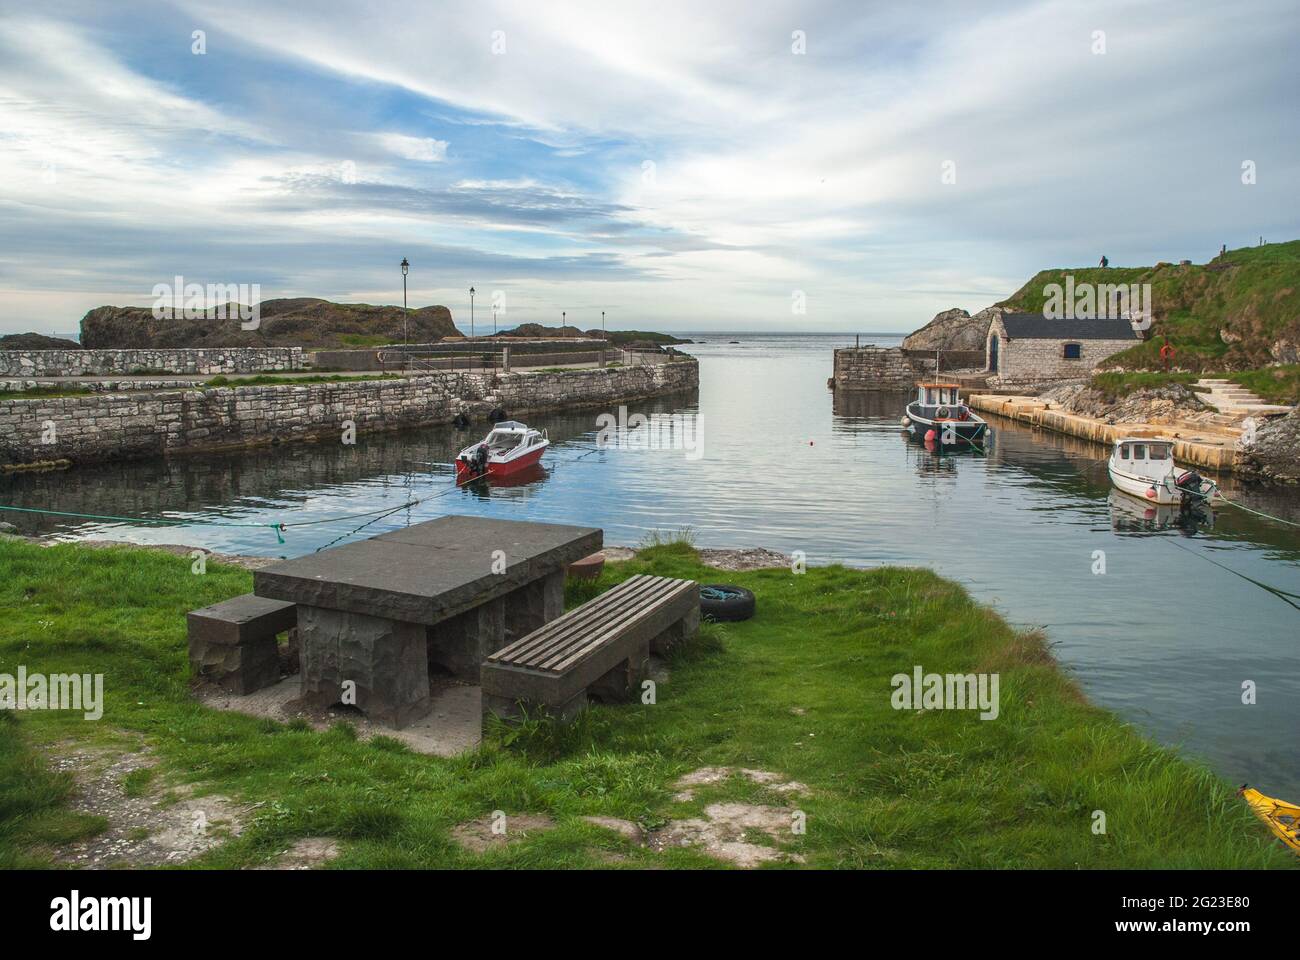 a wooden boat in a body of water in Ballintoy Harbour by Ballycastle in Antrim, Northern Ireland, location for major tv show Stock Photo